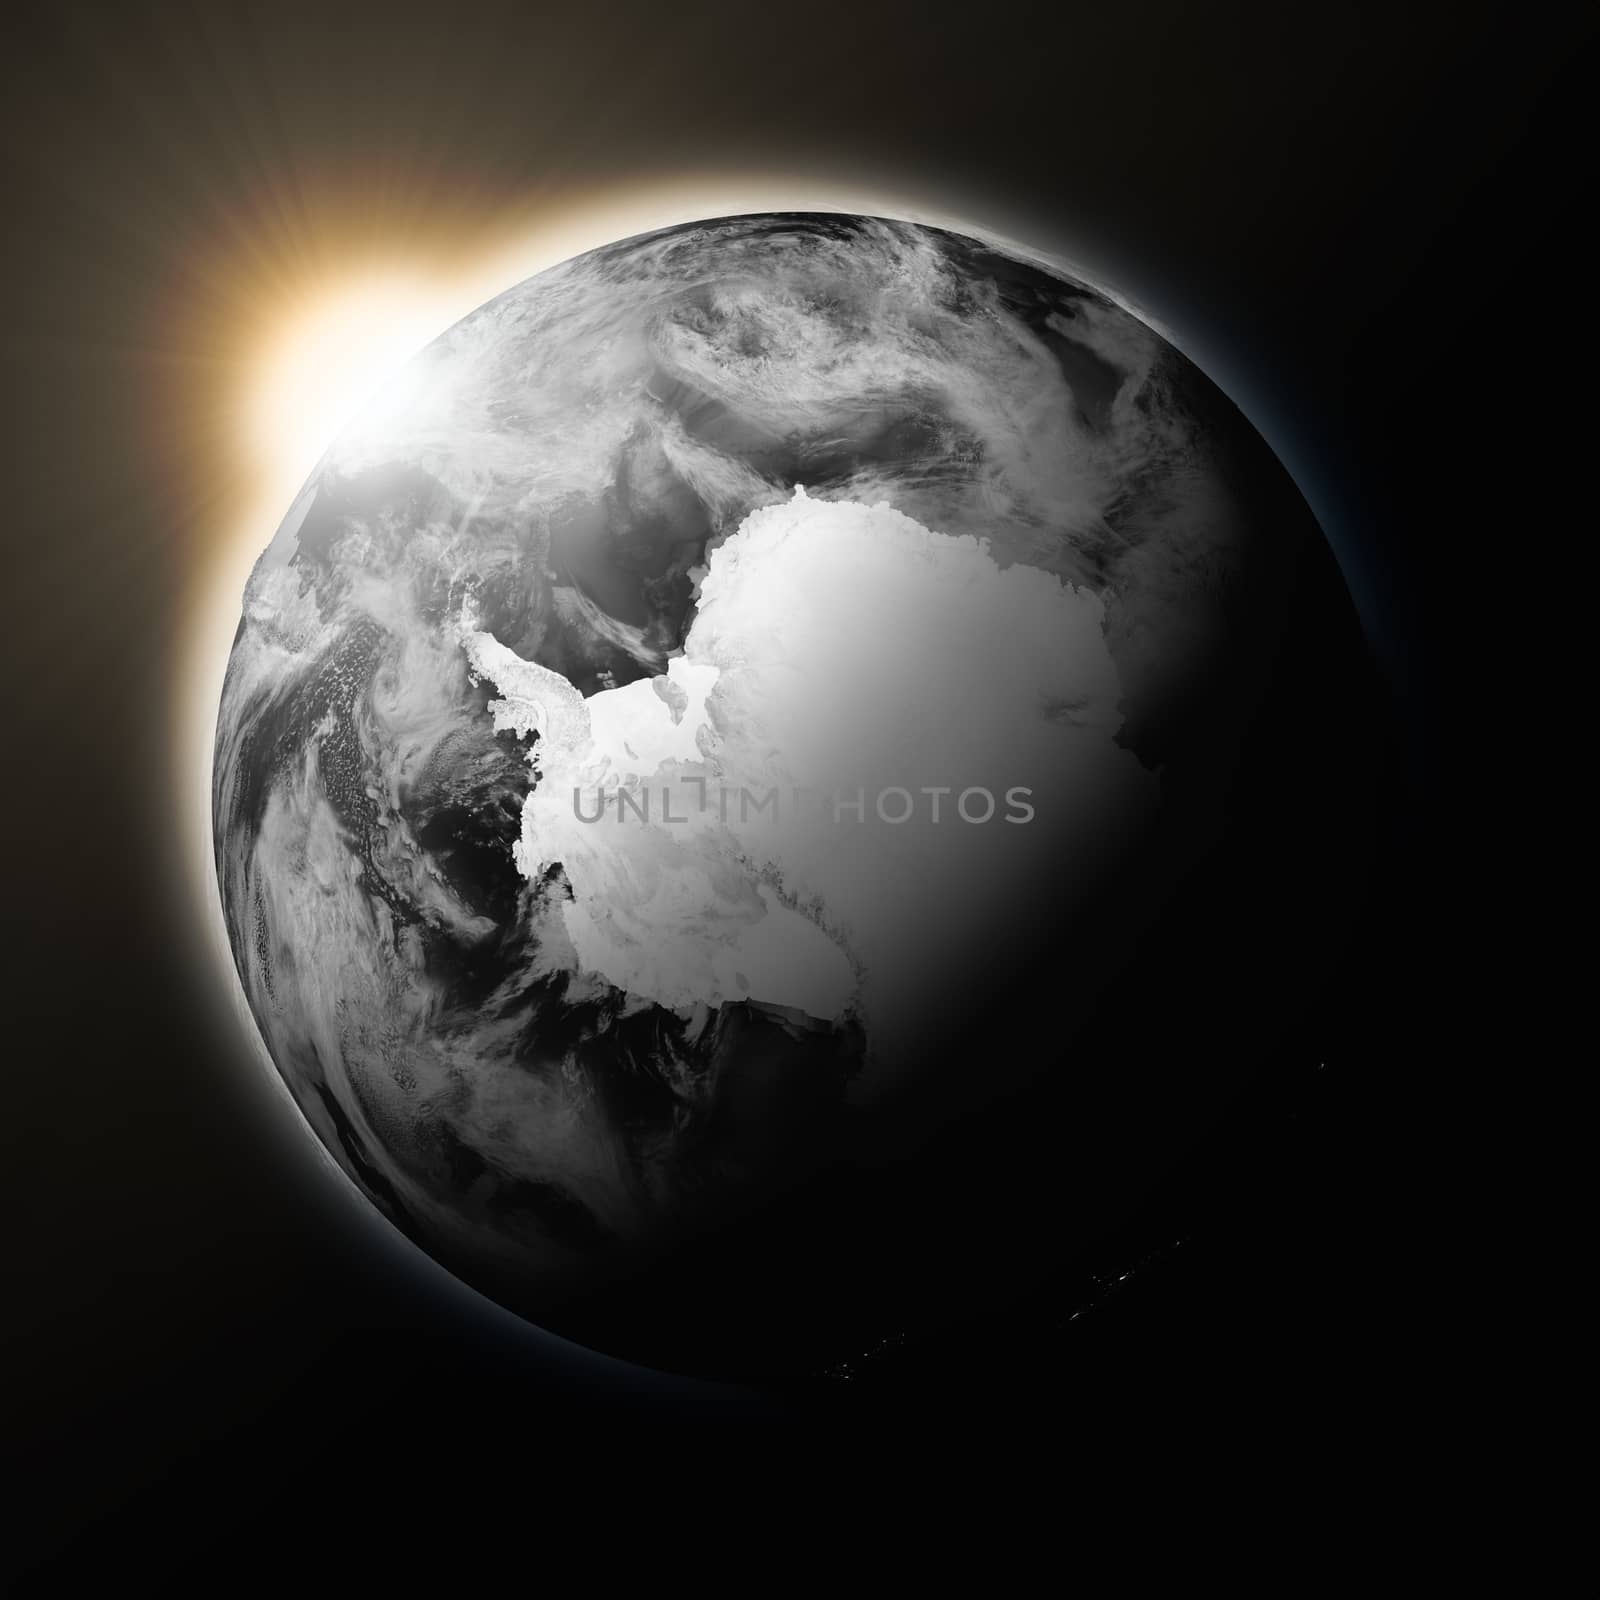 Sun over Antarctica on dark planet Earth isolated on black background. Highly detailed planet surface. Elements of this image furnished by NASA.